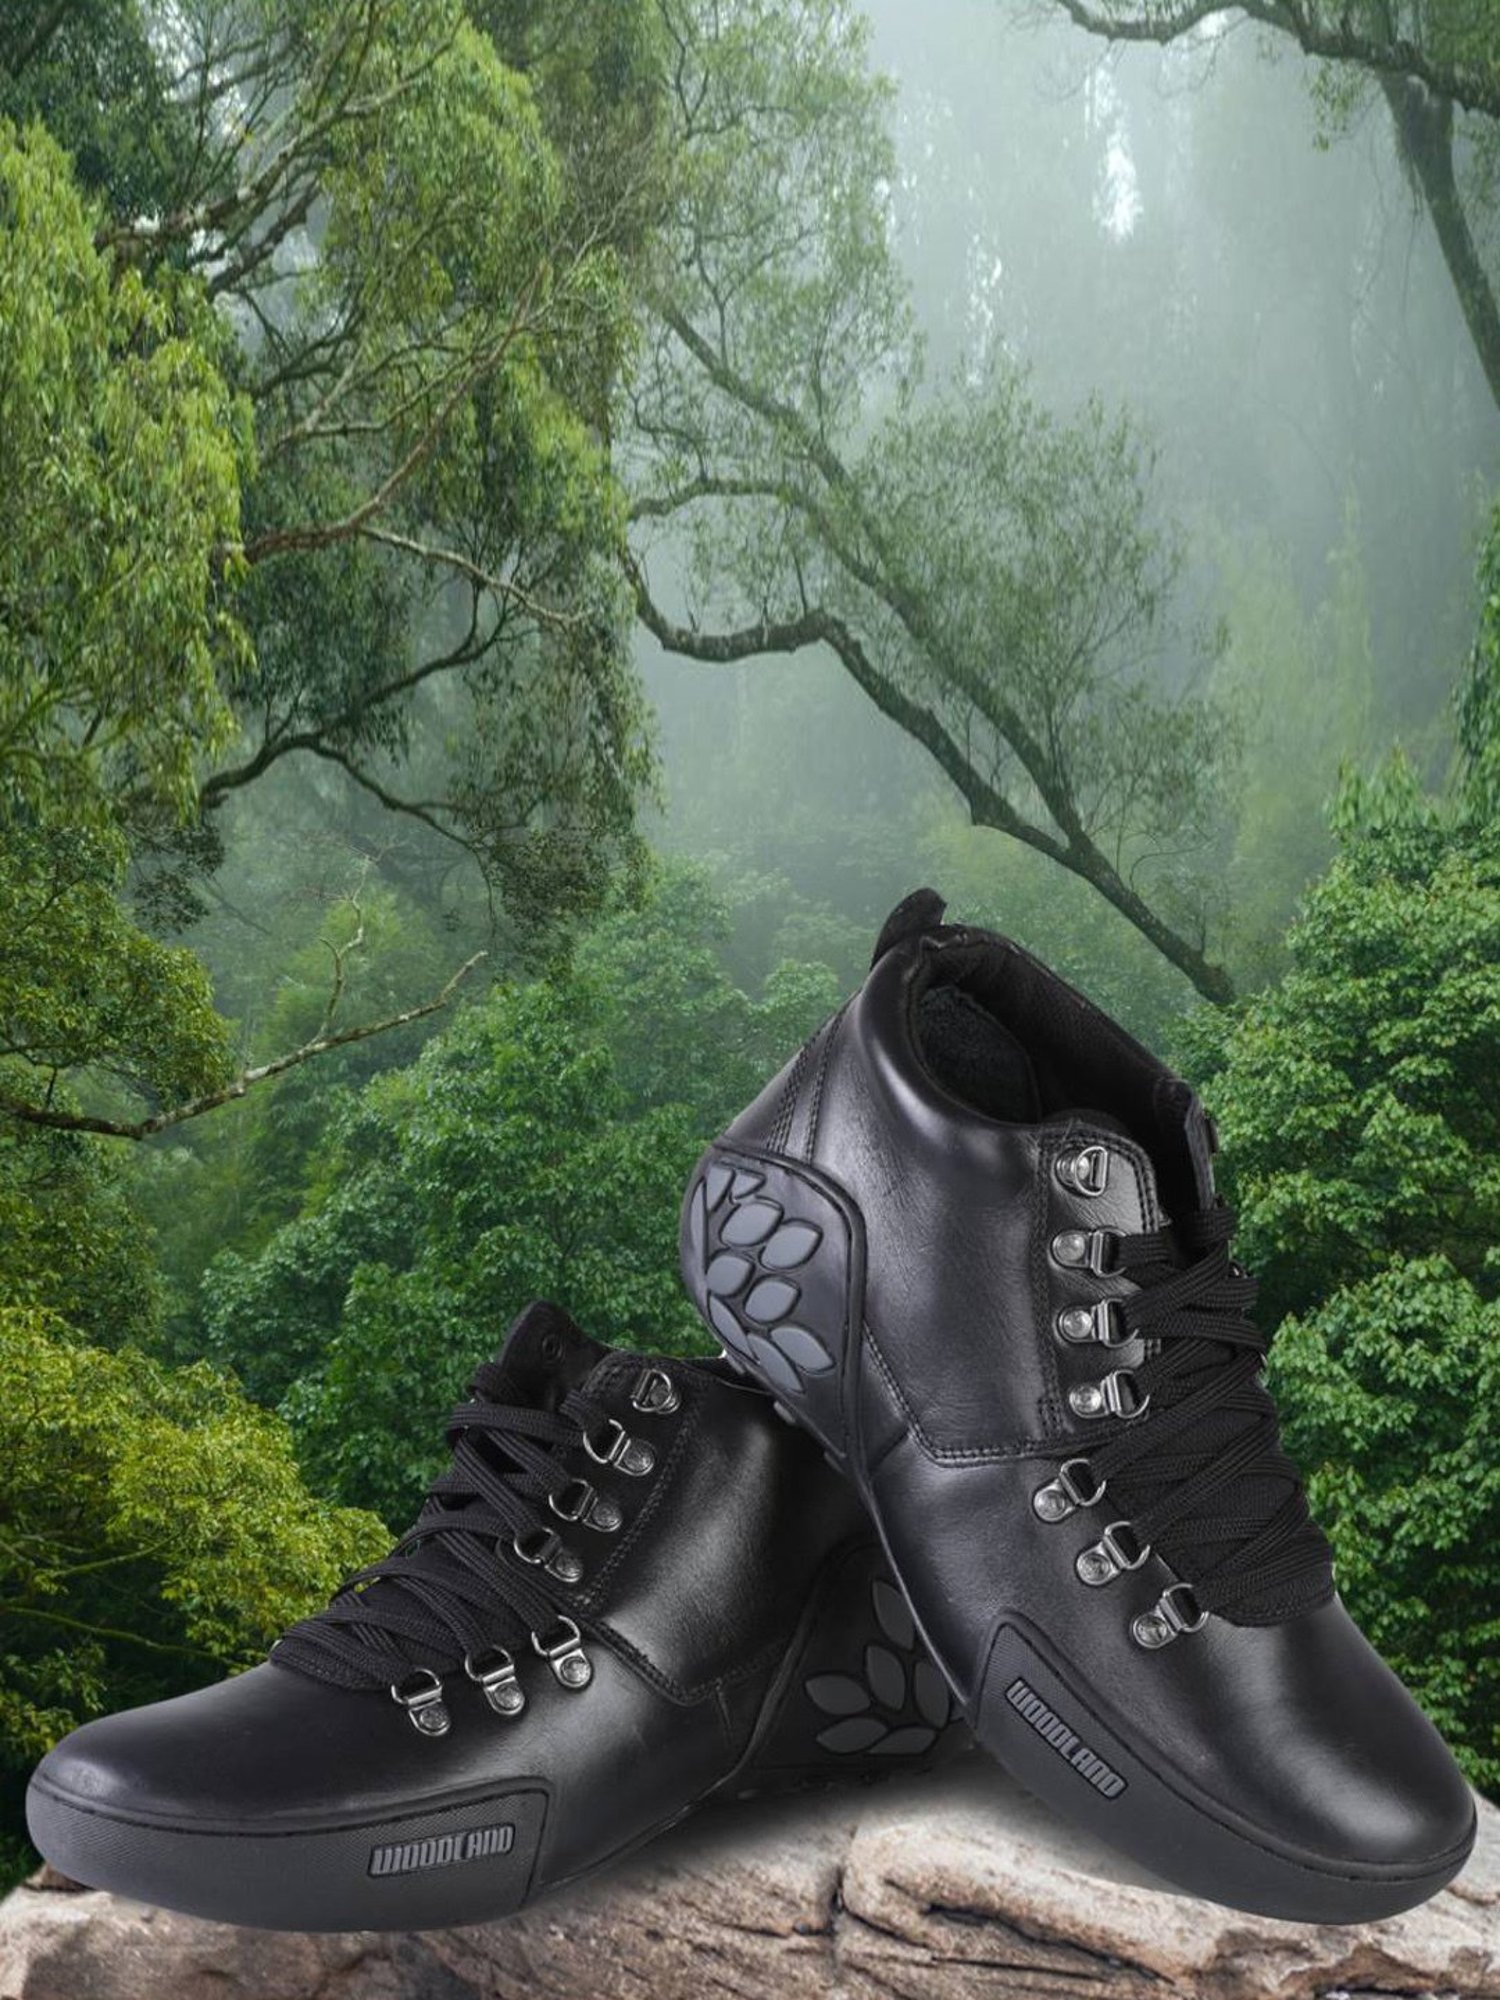 WOODLAND SAILING BLACK in Pune at best price by Raj Shoes - Justdial